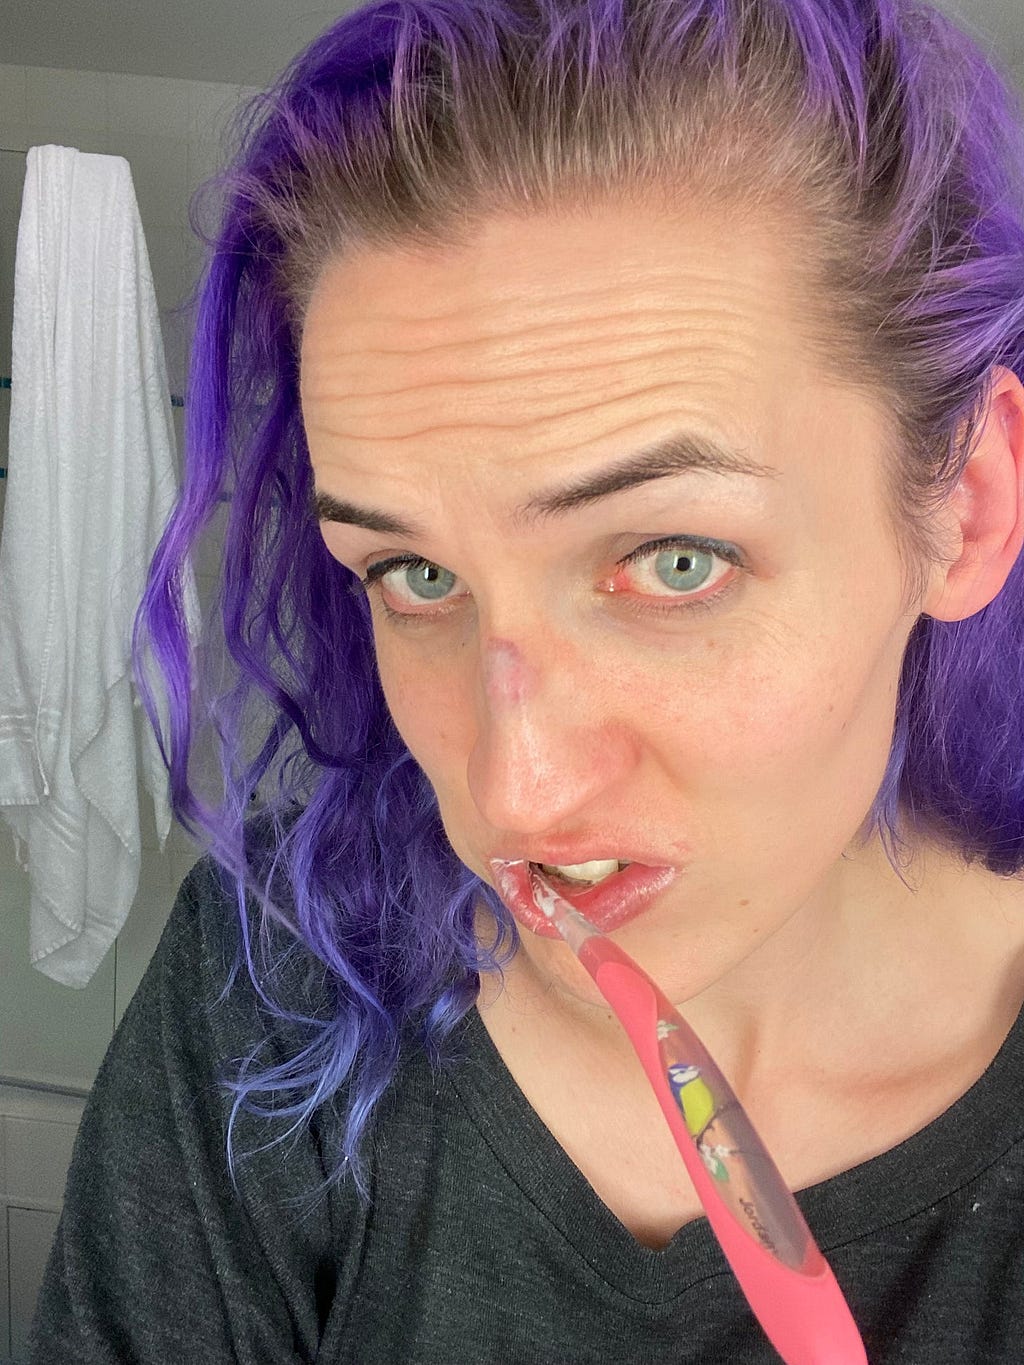 Selfie with toothbrush in mouth and bruise on nose as described in main text.